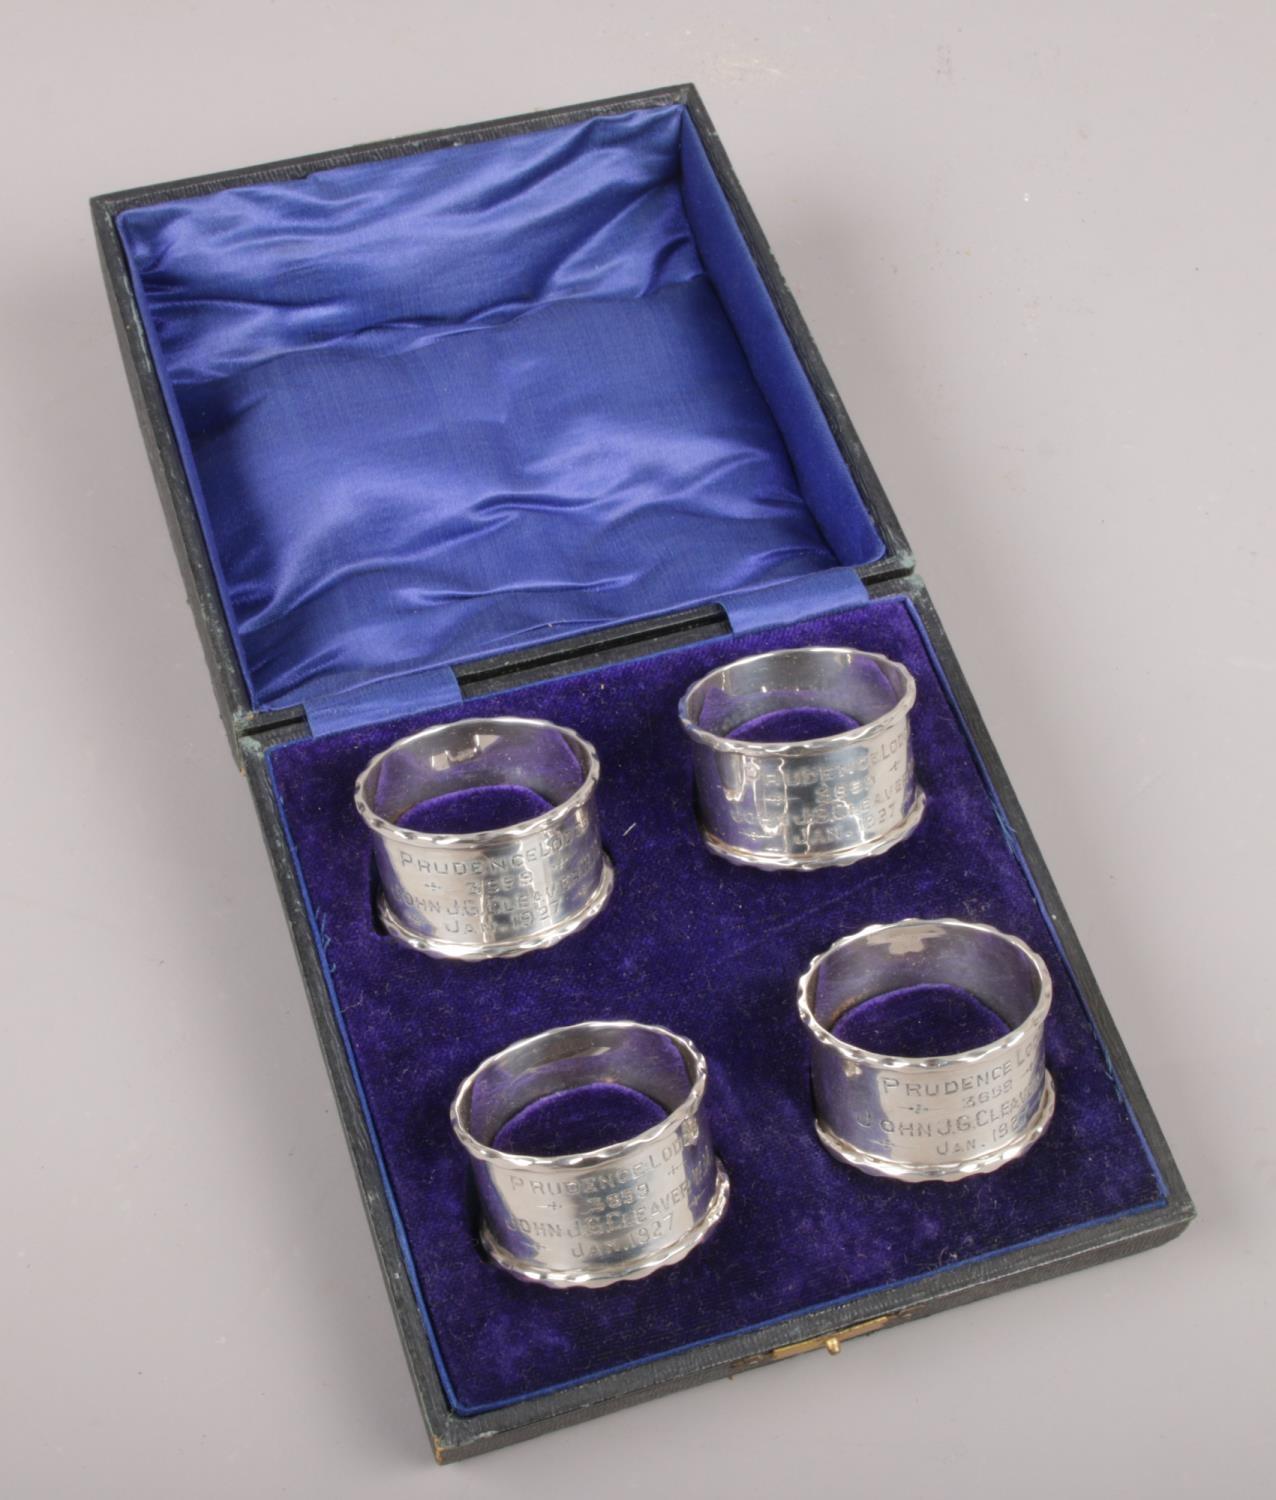 A cased set of four George V masonic silver serviette rings, Prudence Lodge 3559, assayed Birmingham